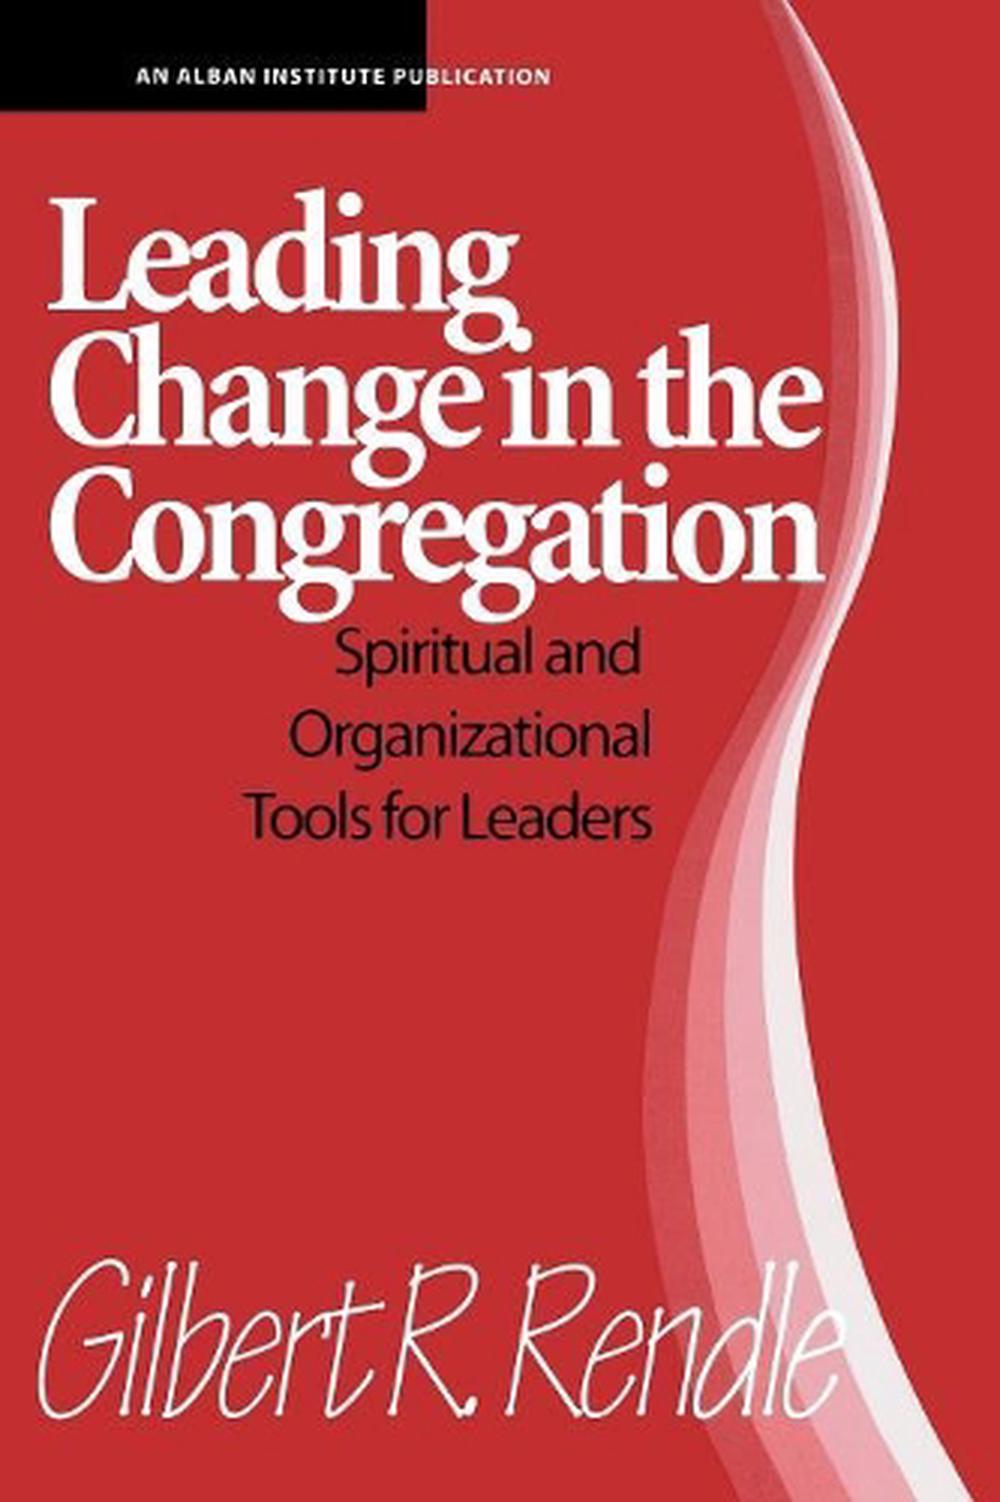 Leading Change in the Congregation Spiritual & Organizational Tools for Leaders by Gilbert R